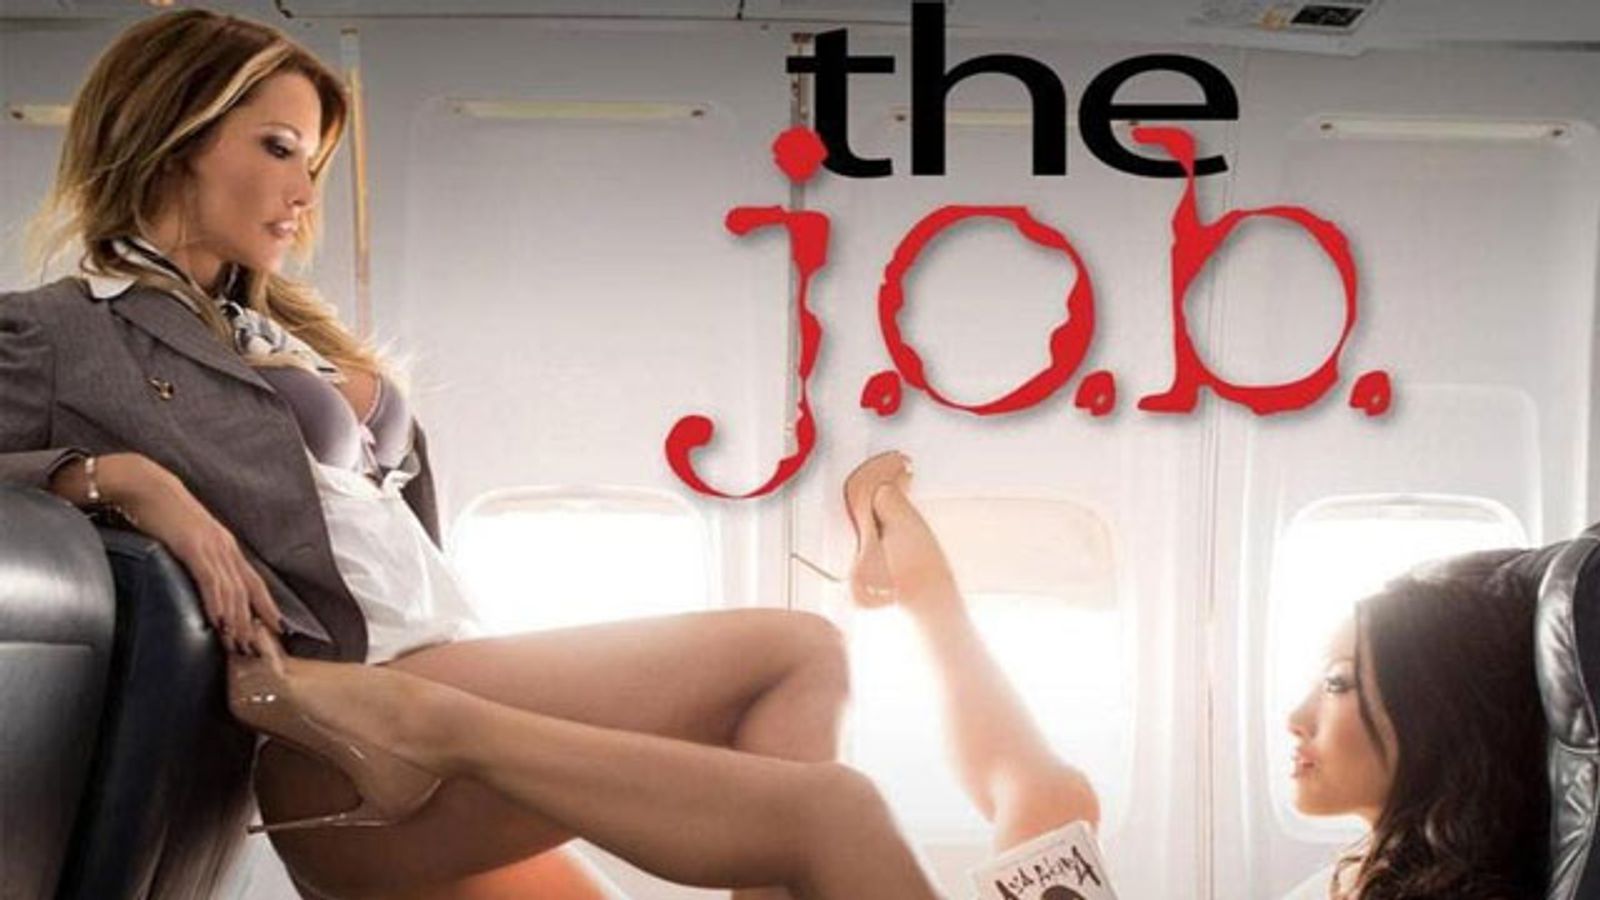 Brad Armstrong Goes Meta With New Feature 'The J.O.B.'